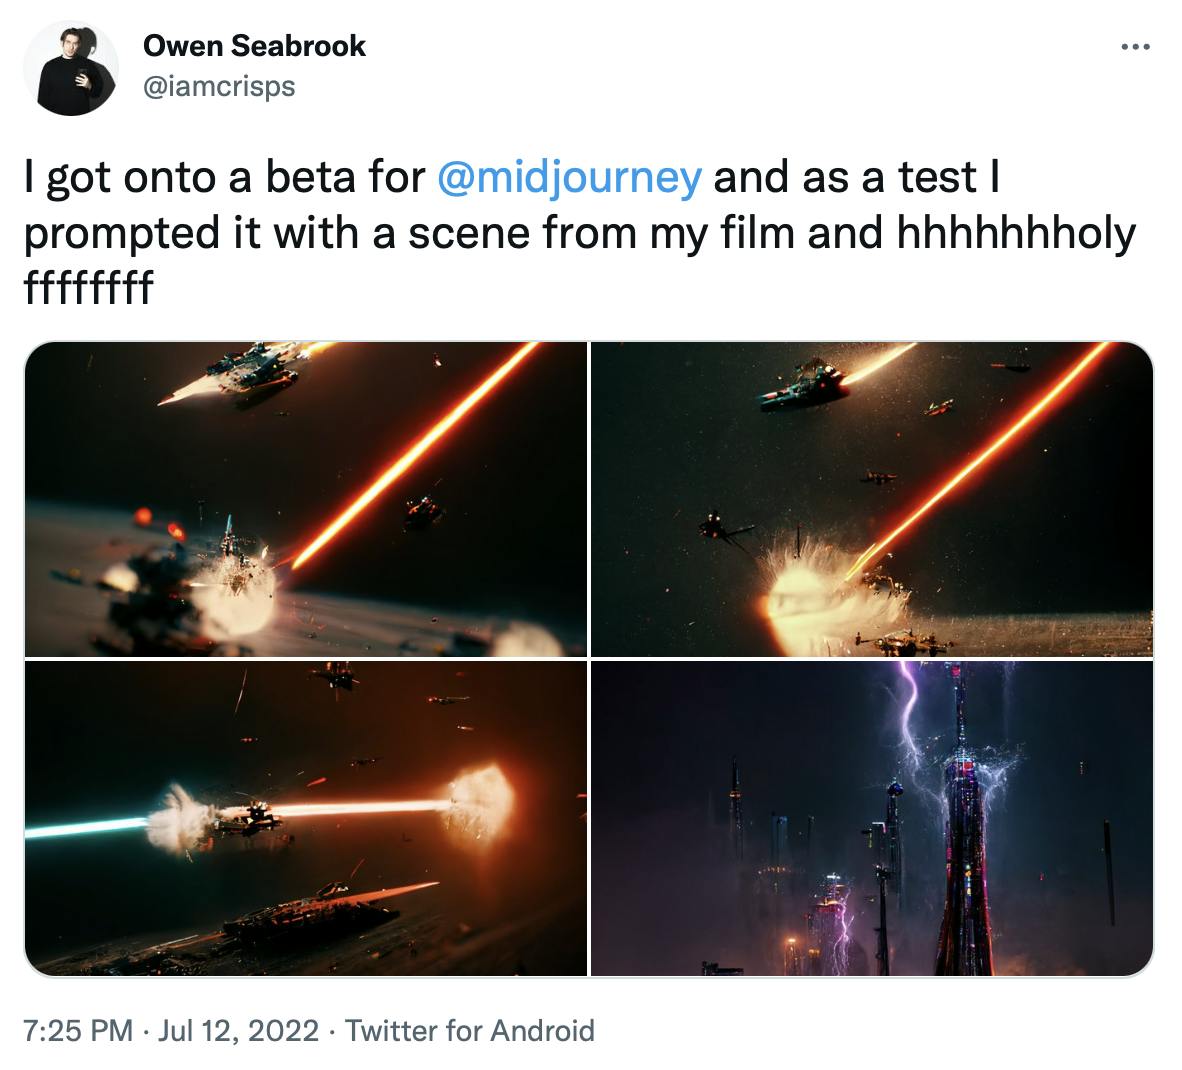 Image of a tweet showing amazing-looking space-themed images generated as concept art for a writers film script